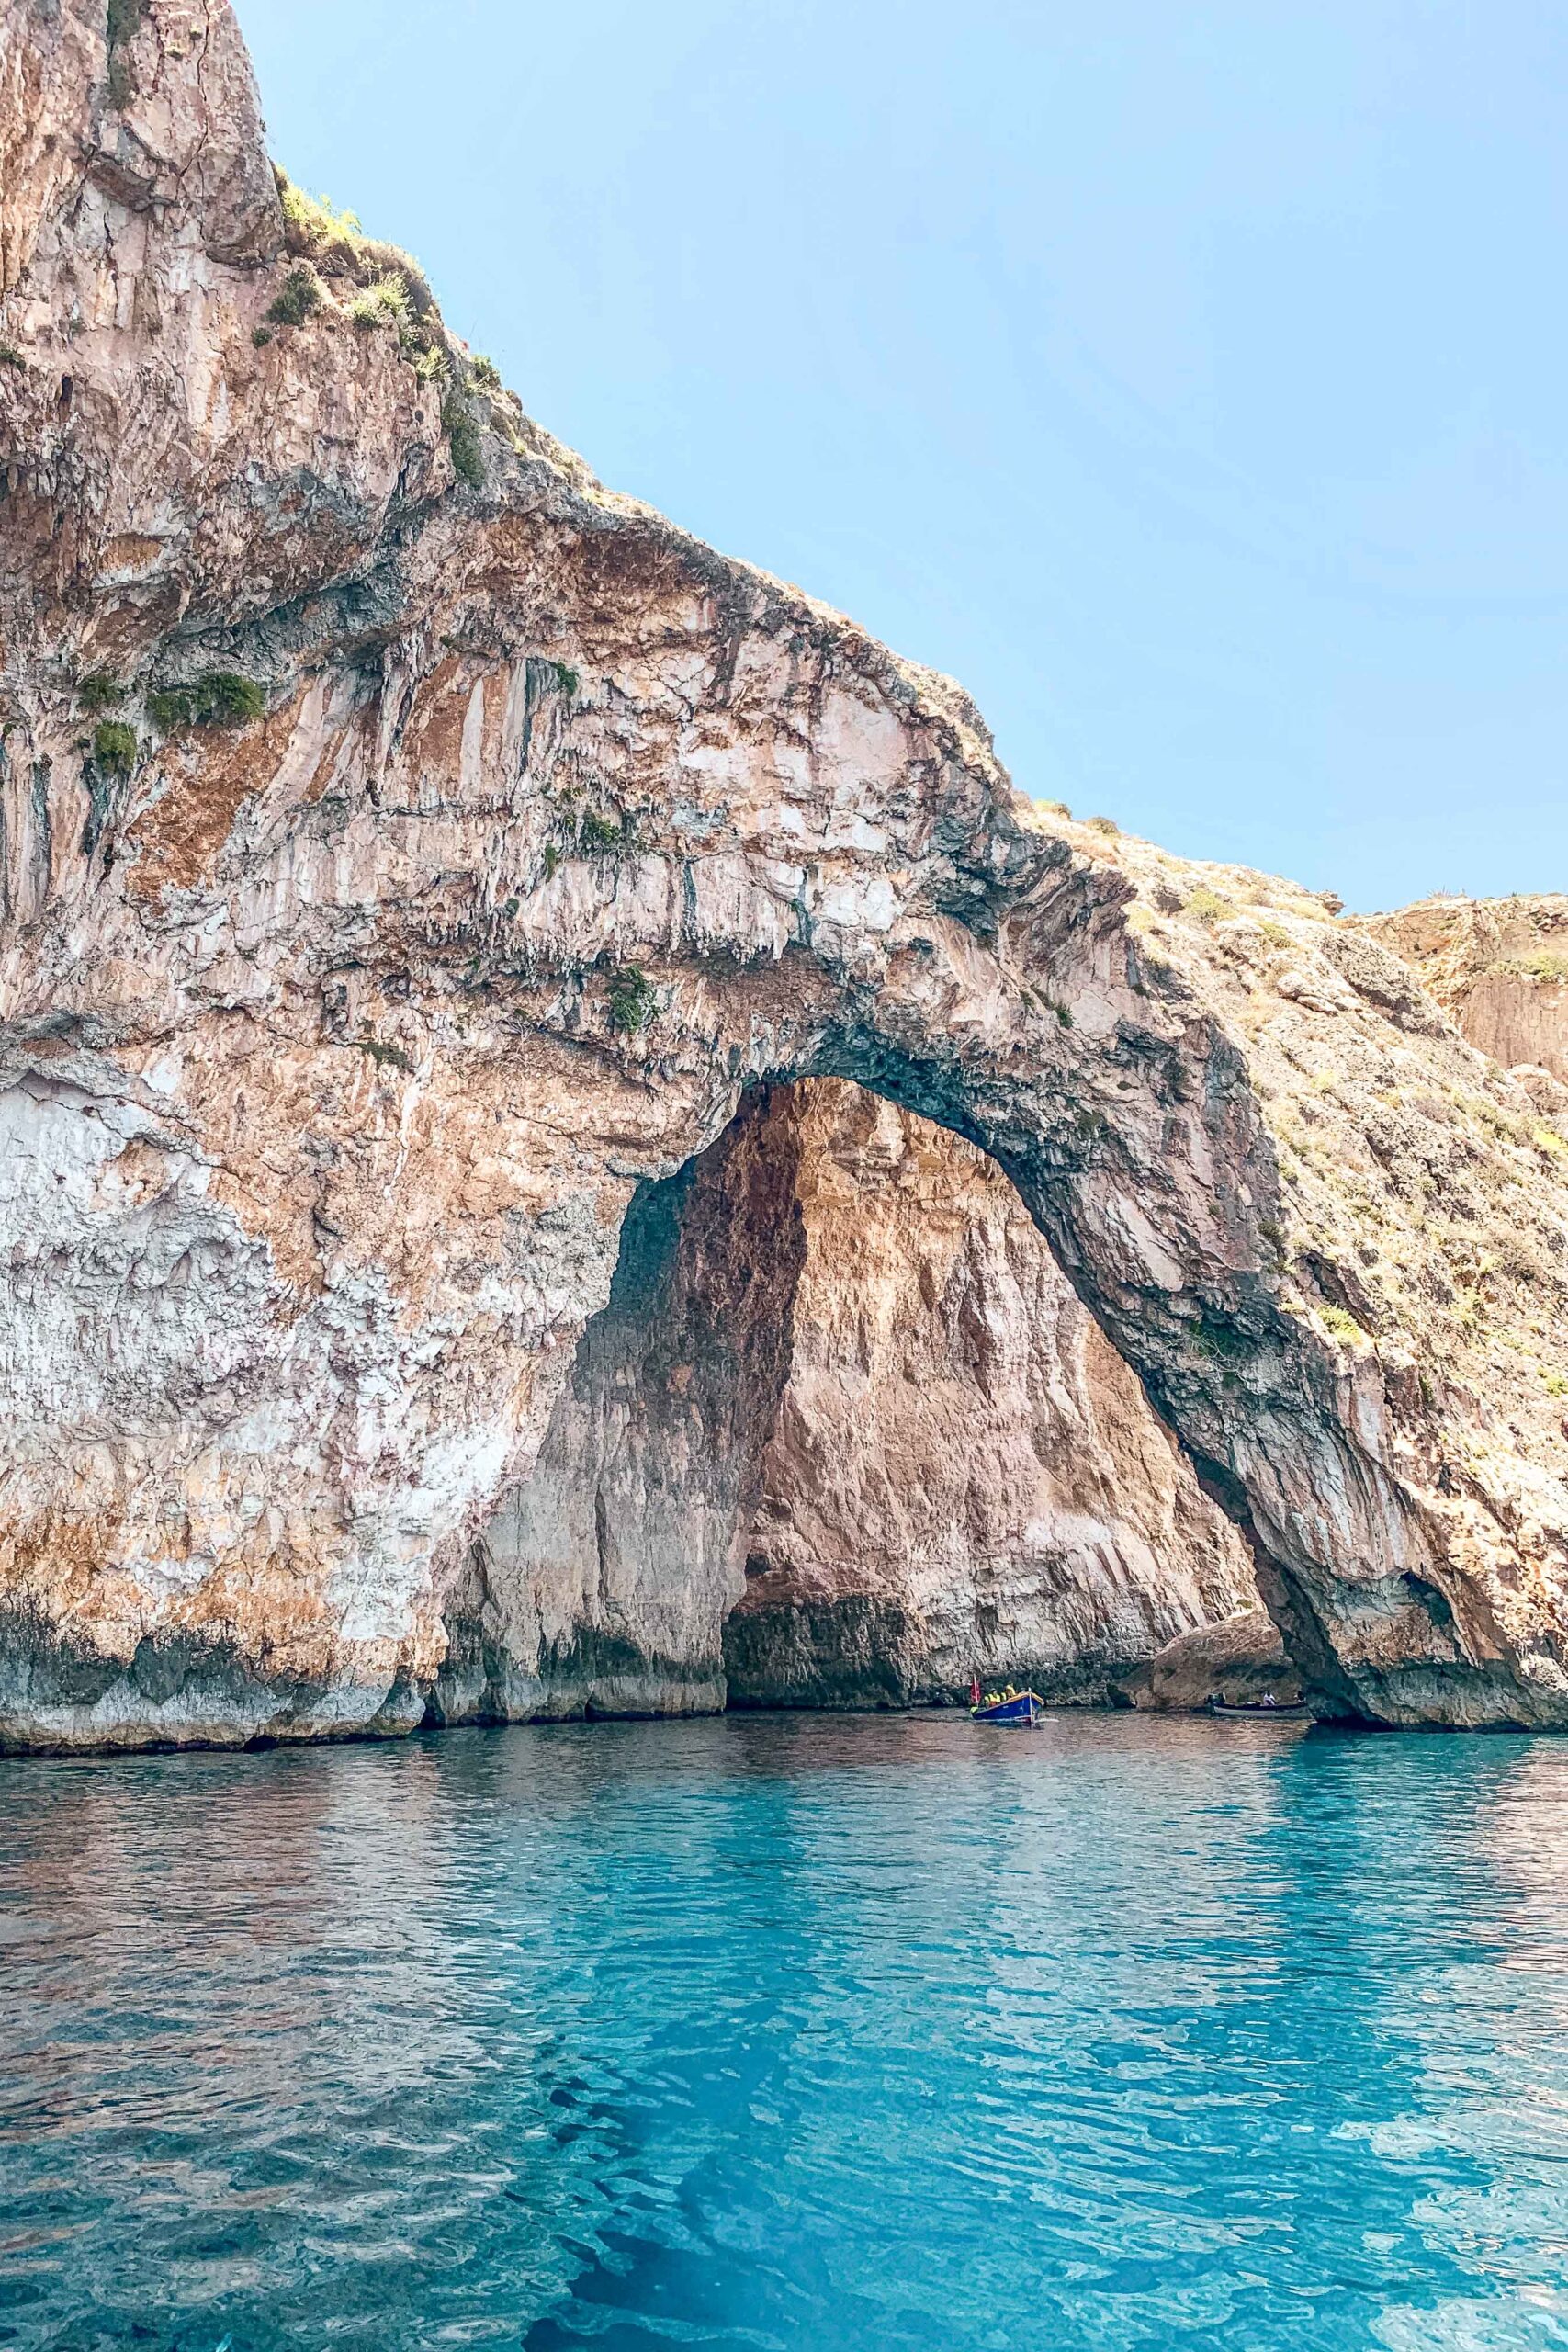 View of the Blue Grotto from the water with boat tour in Wied Iż-Żurrieq, Malta